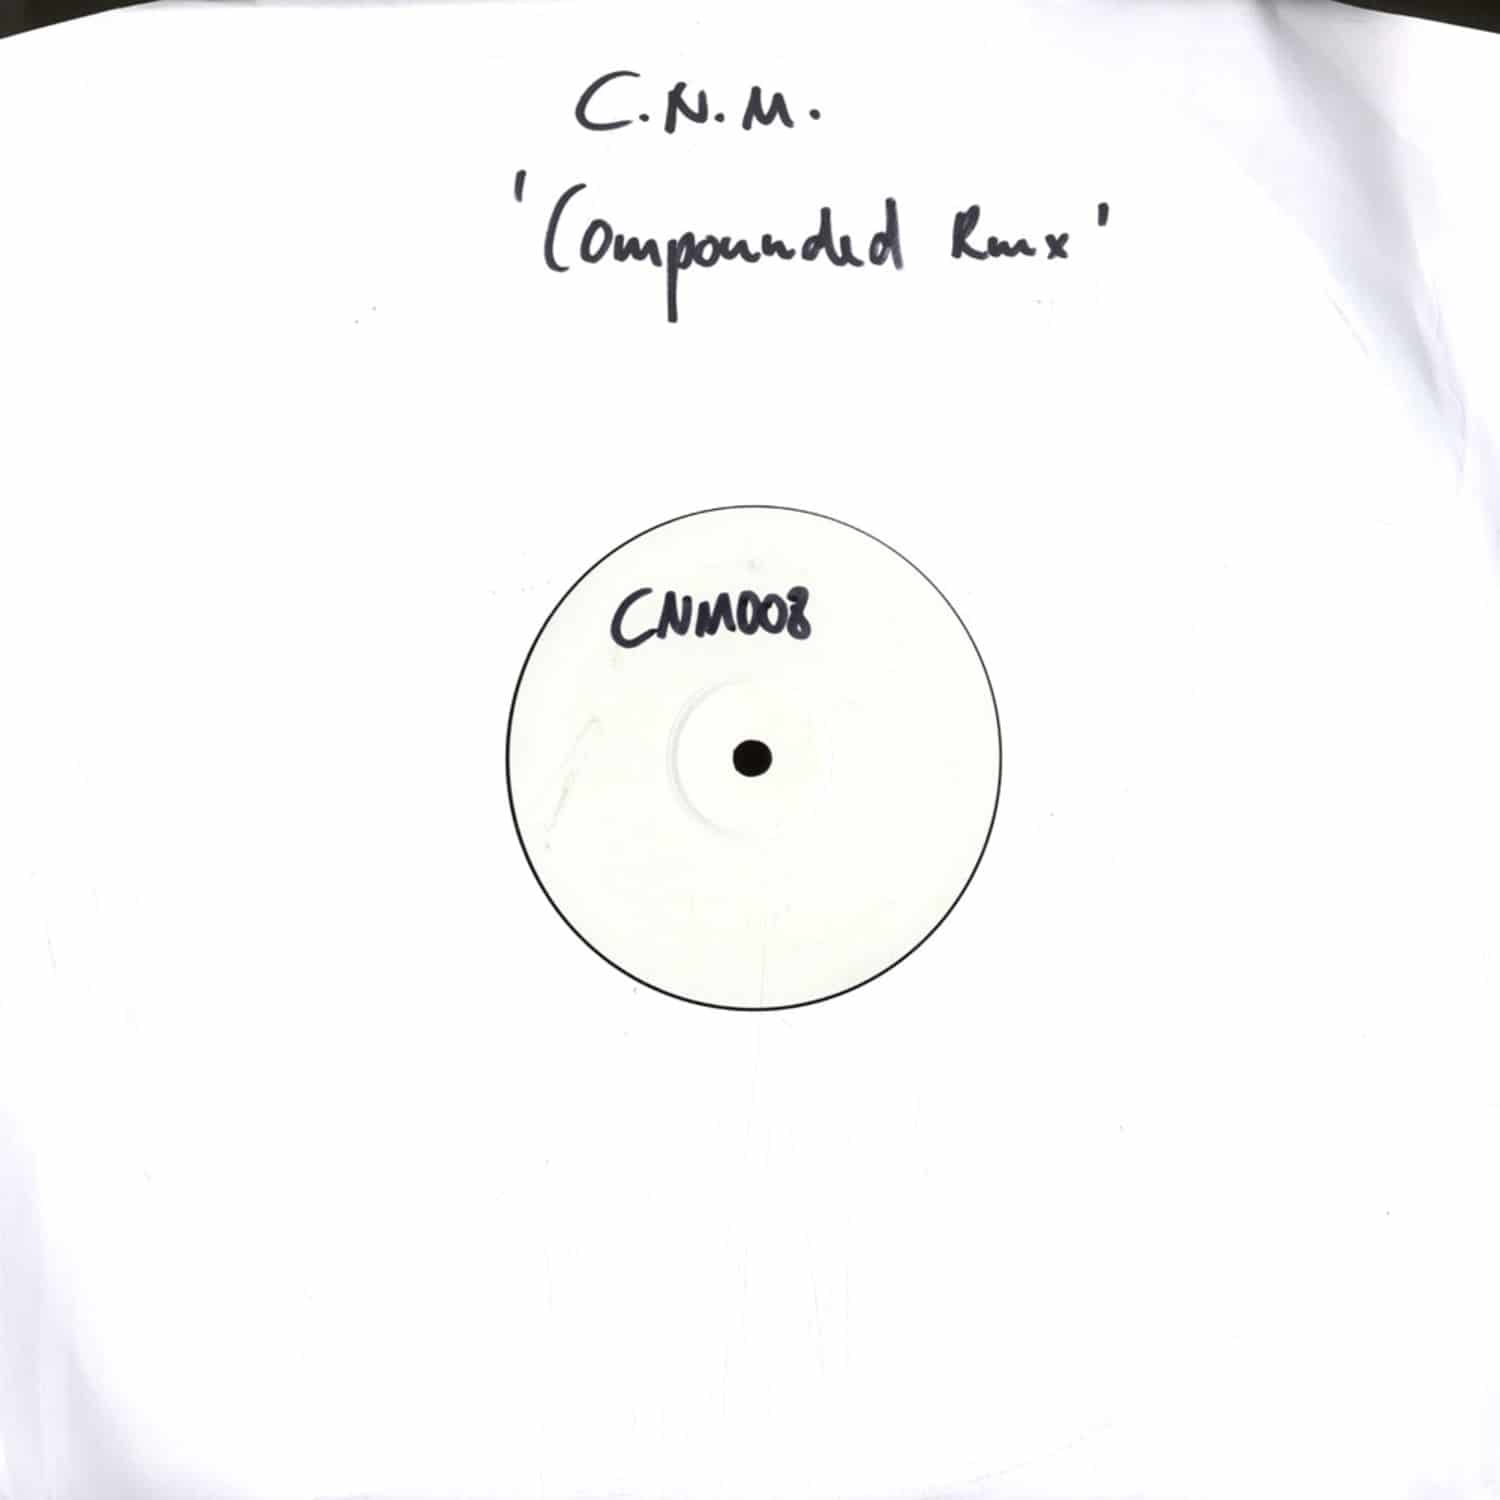 CNM - COMPOUNDED REMIX